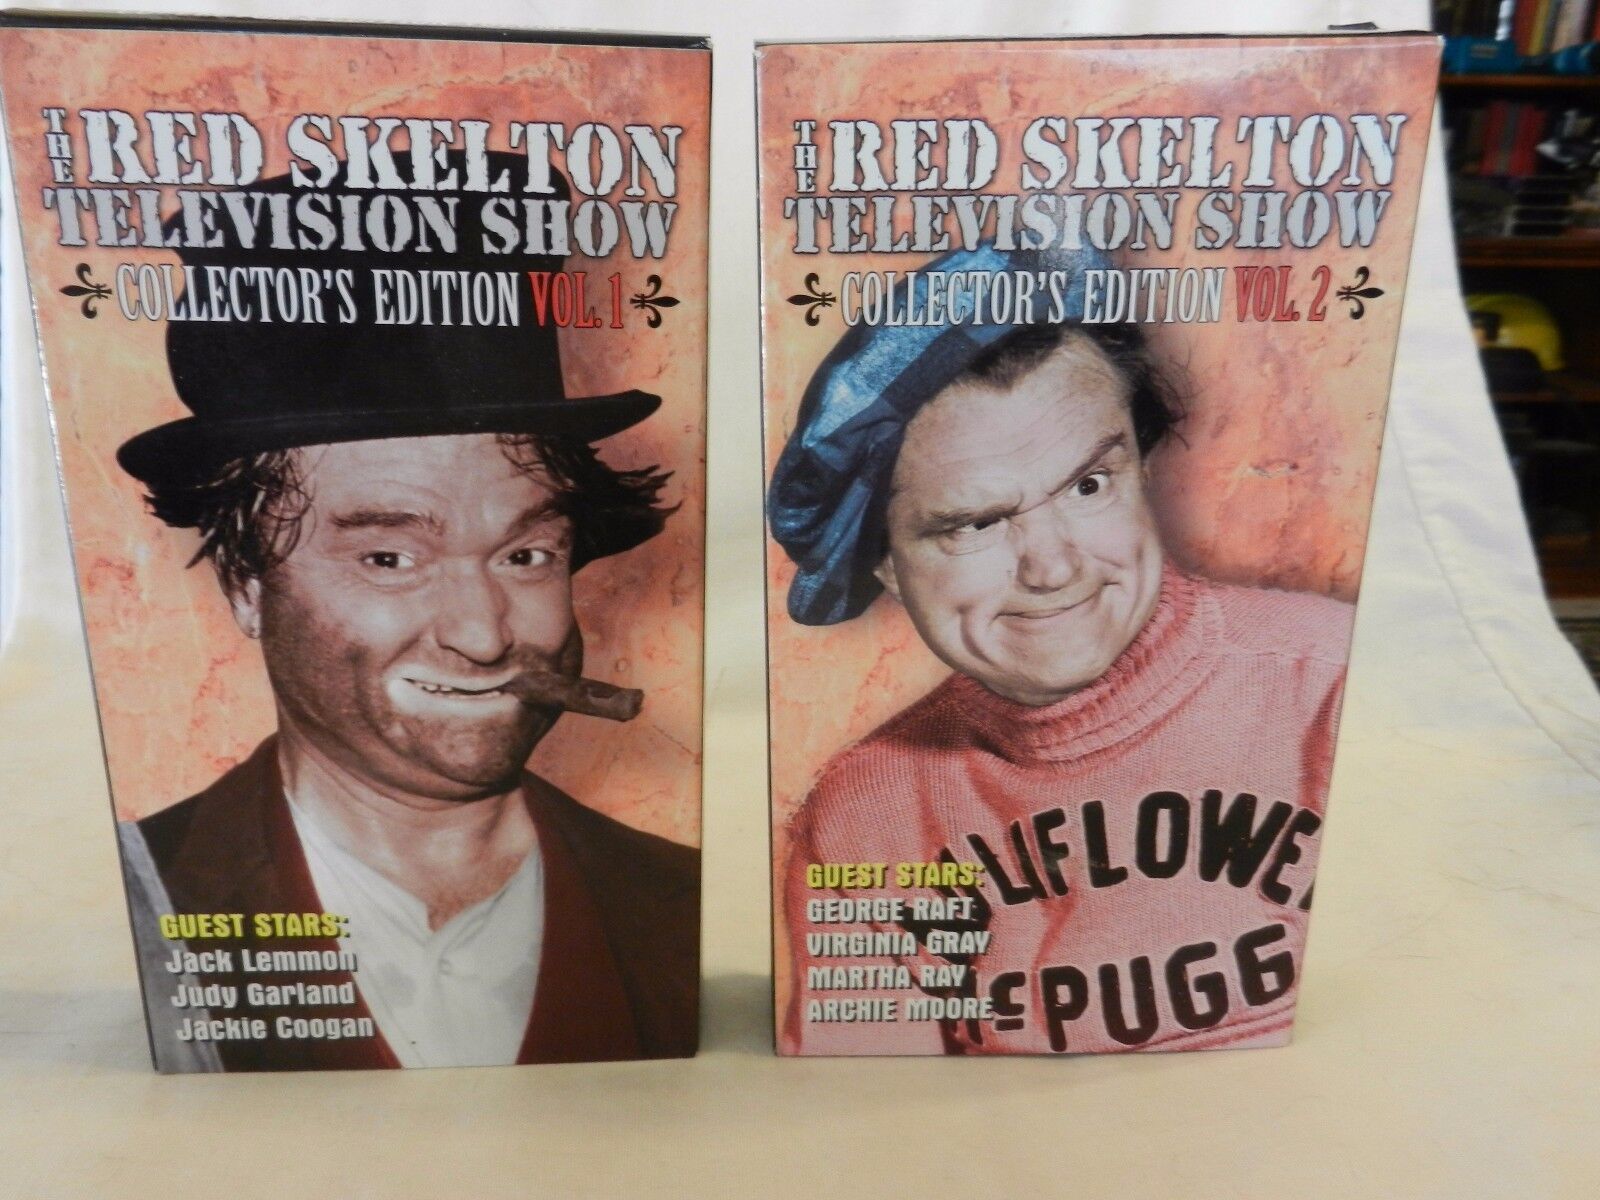 Primary image for The Red Skelton Television Show (VHS) Volume 1 and 2 Collector's Edition (FJ)